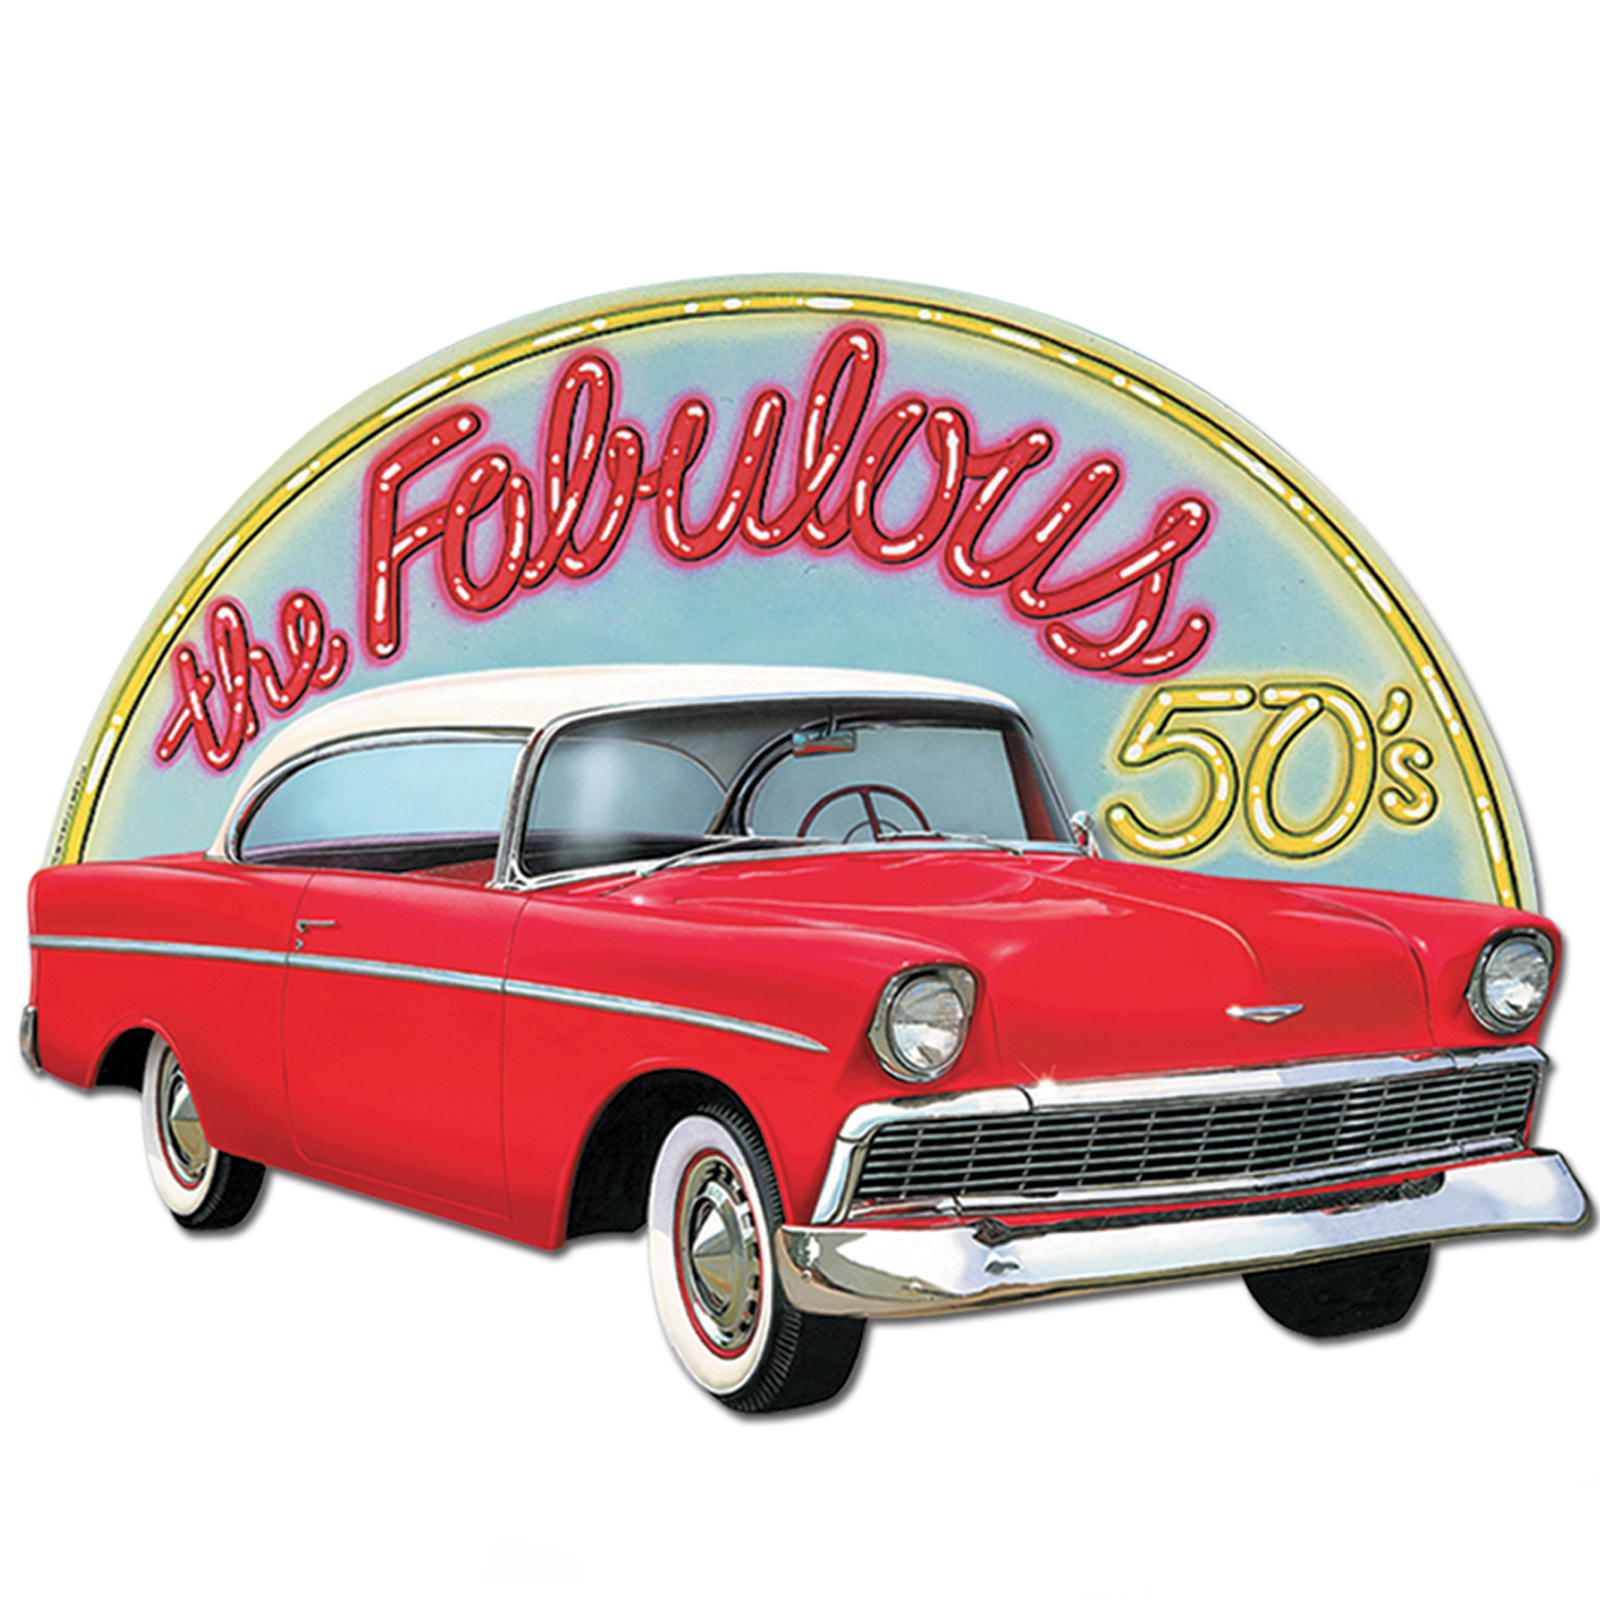 Albums 102+ Pictures Cars From The 50s For Sale Full HD, 2k, 4k